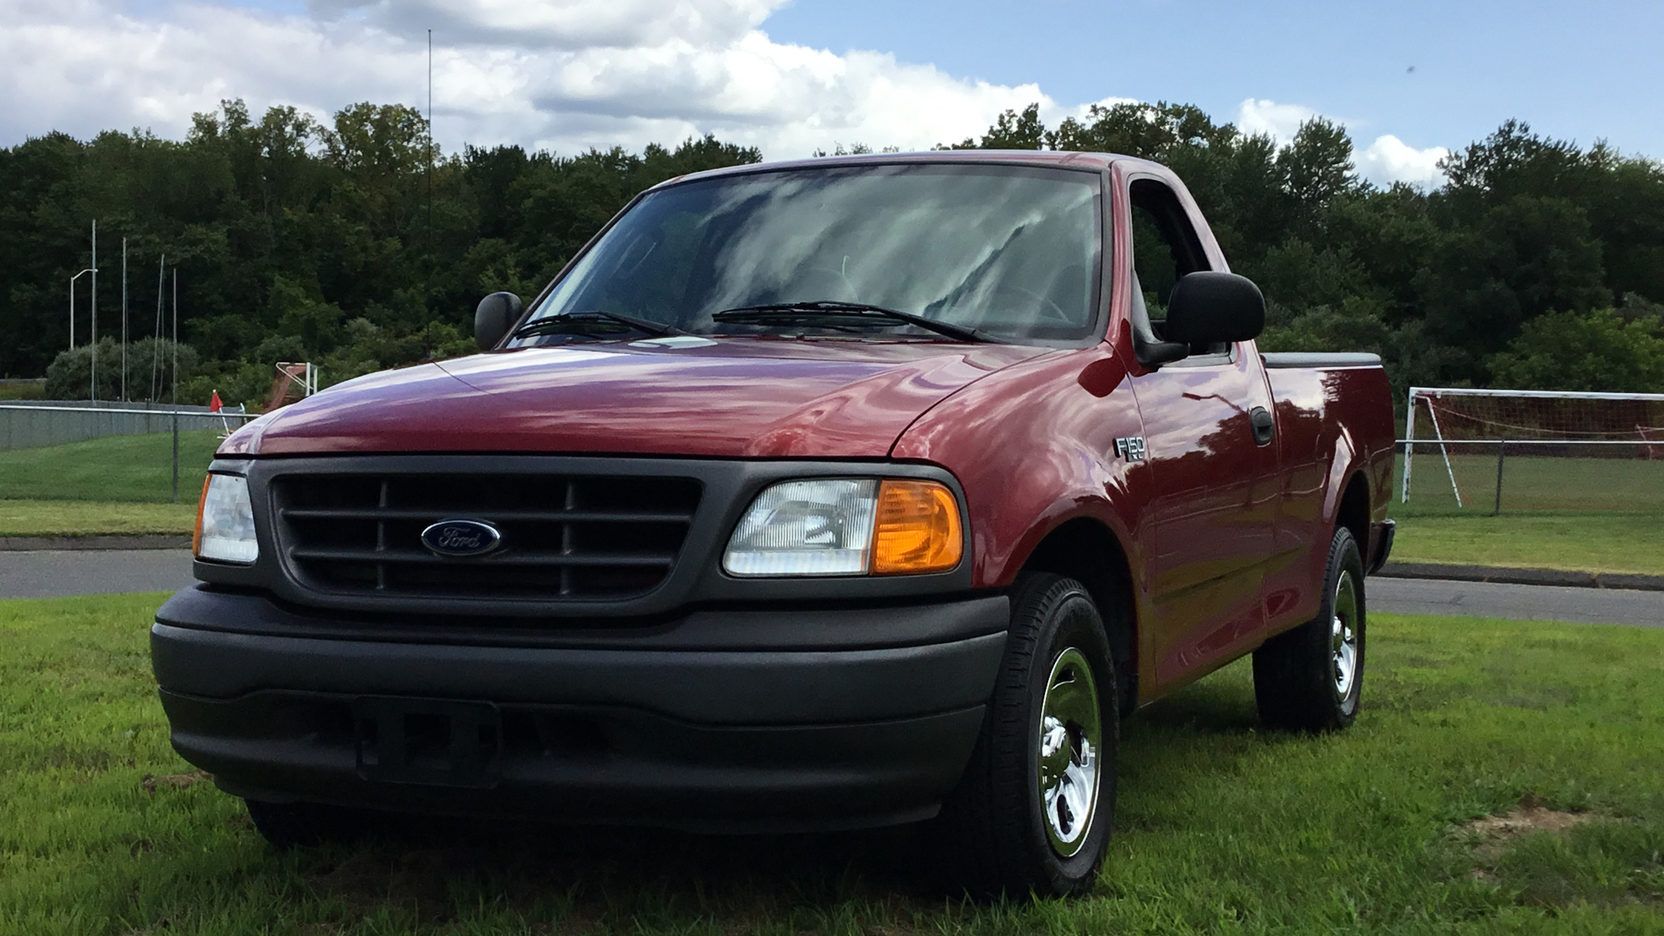 2004 ford F-150 Heritage pickup